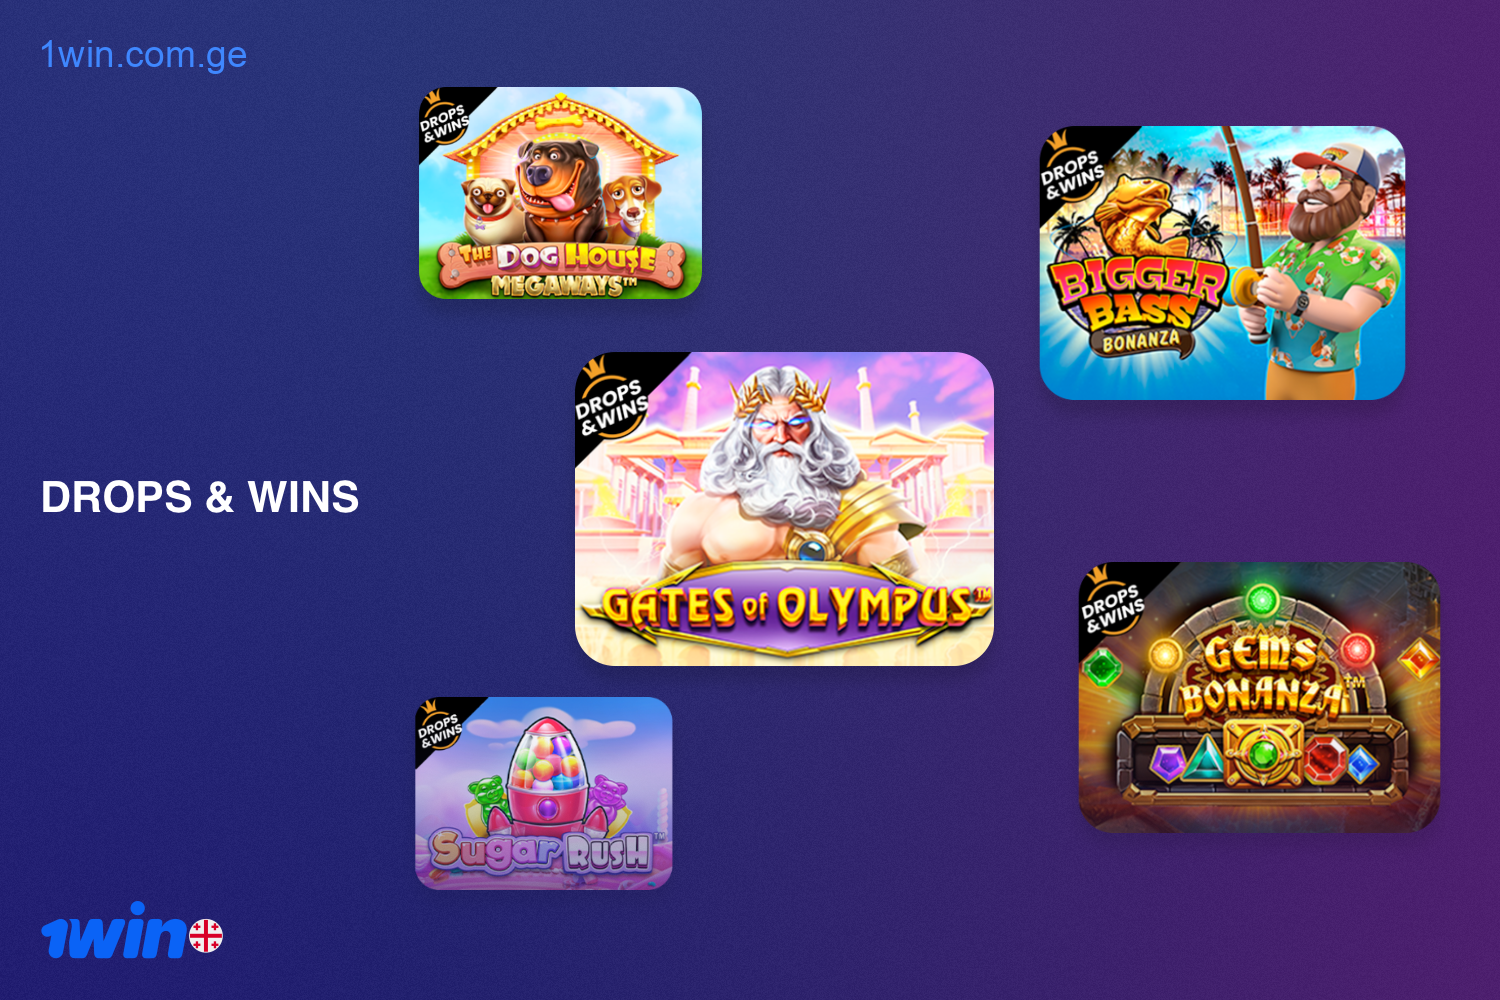 At 1win Georgia casino, users can play Drops & Wins games